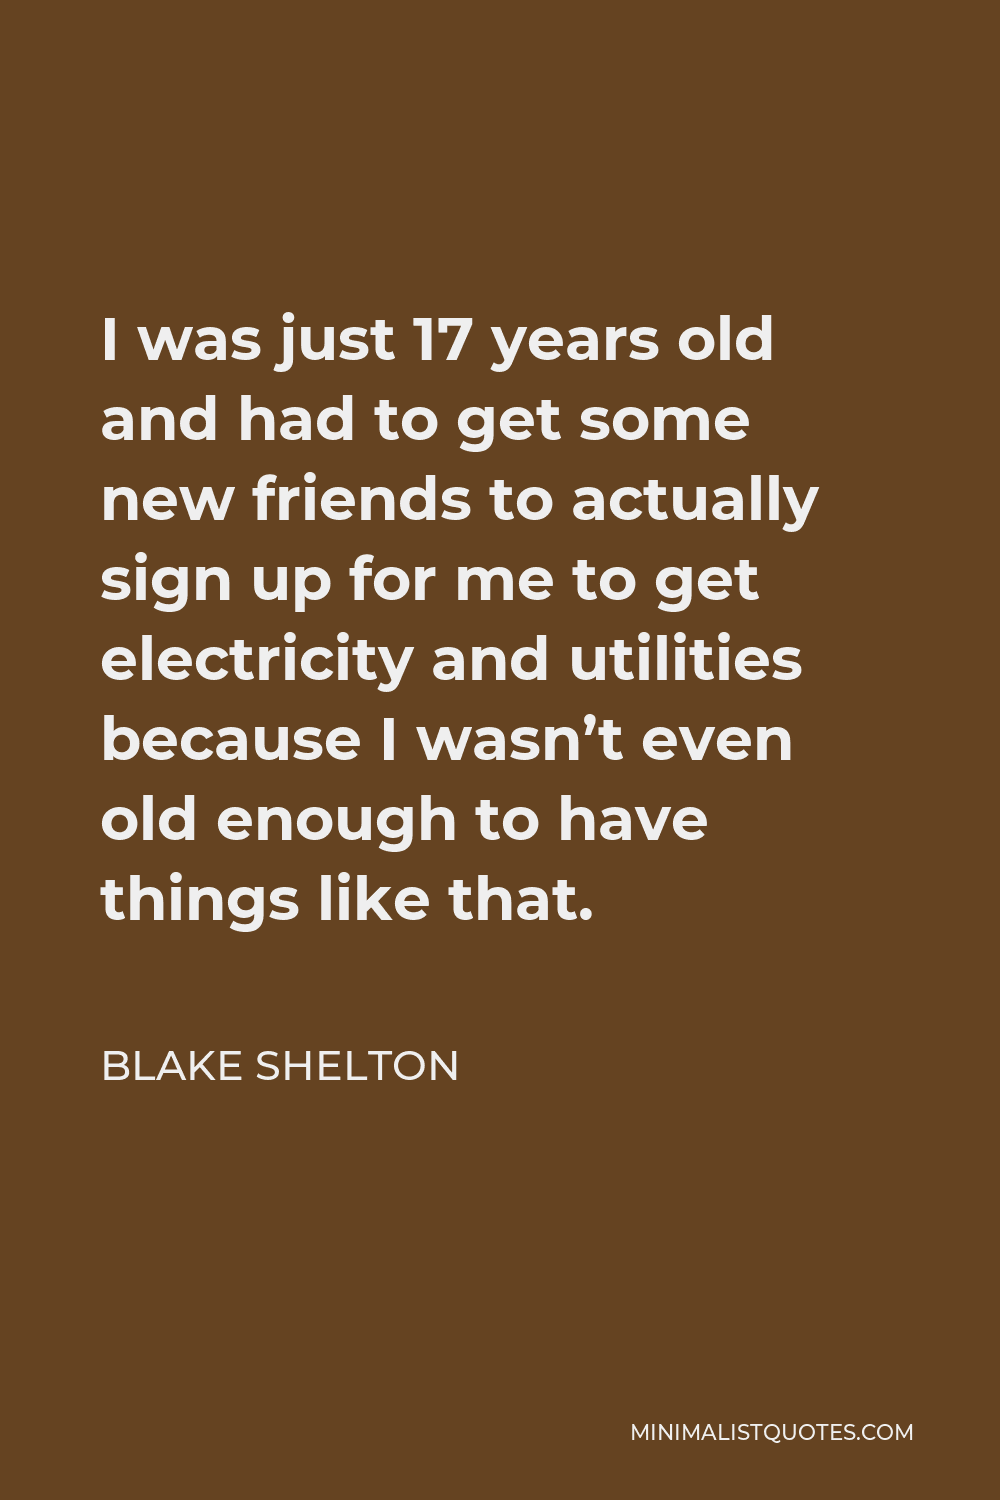 Blake Shelton Quote - I was just 17 years old and had to get some new friends to actually sign up for me to get electricity and utilities because I wasn’t even old enough to have things like that.